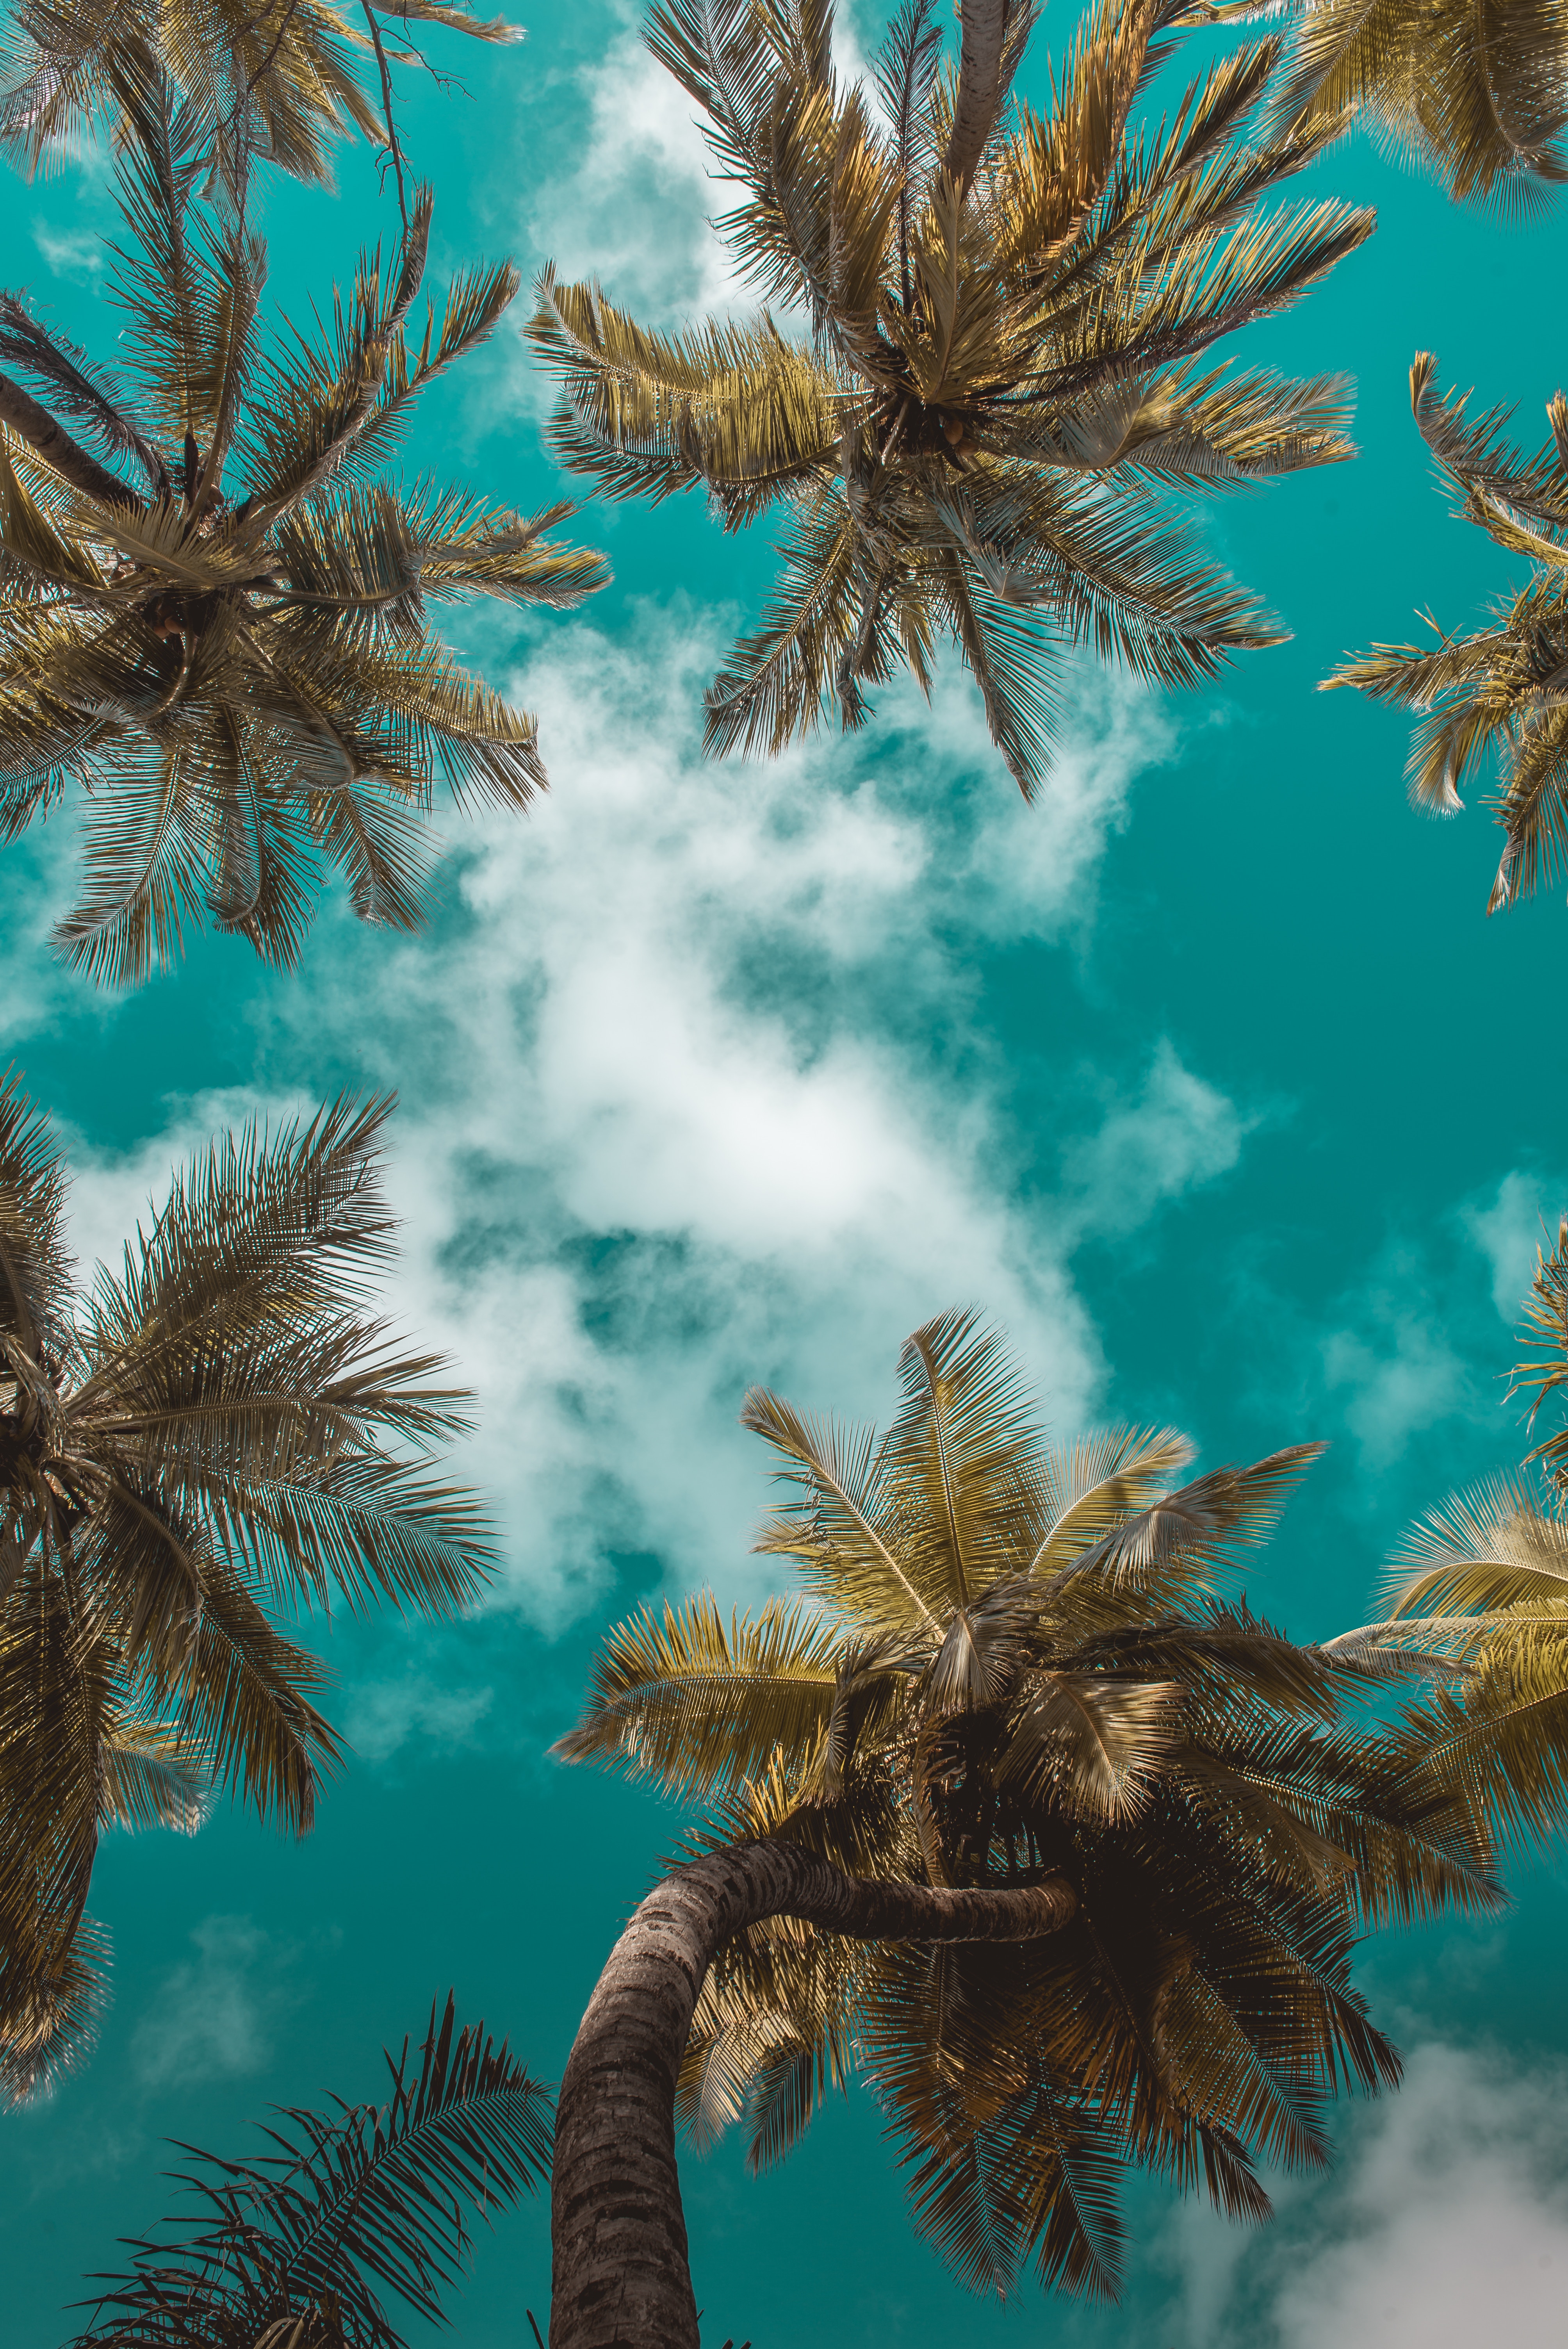 Free HD leaves, palms, nature, branches, sky, clouds, tropics, bottom view